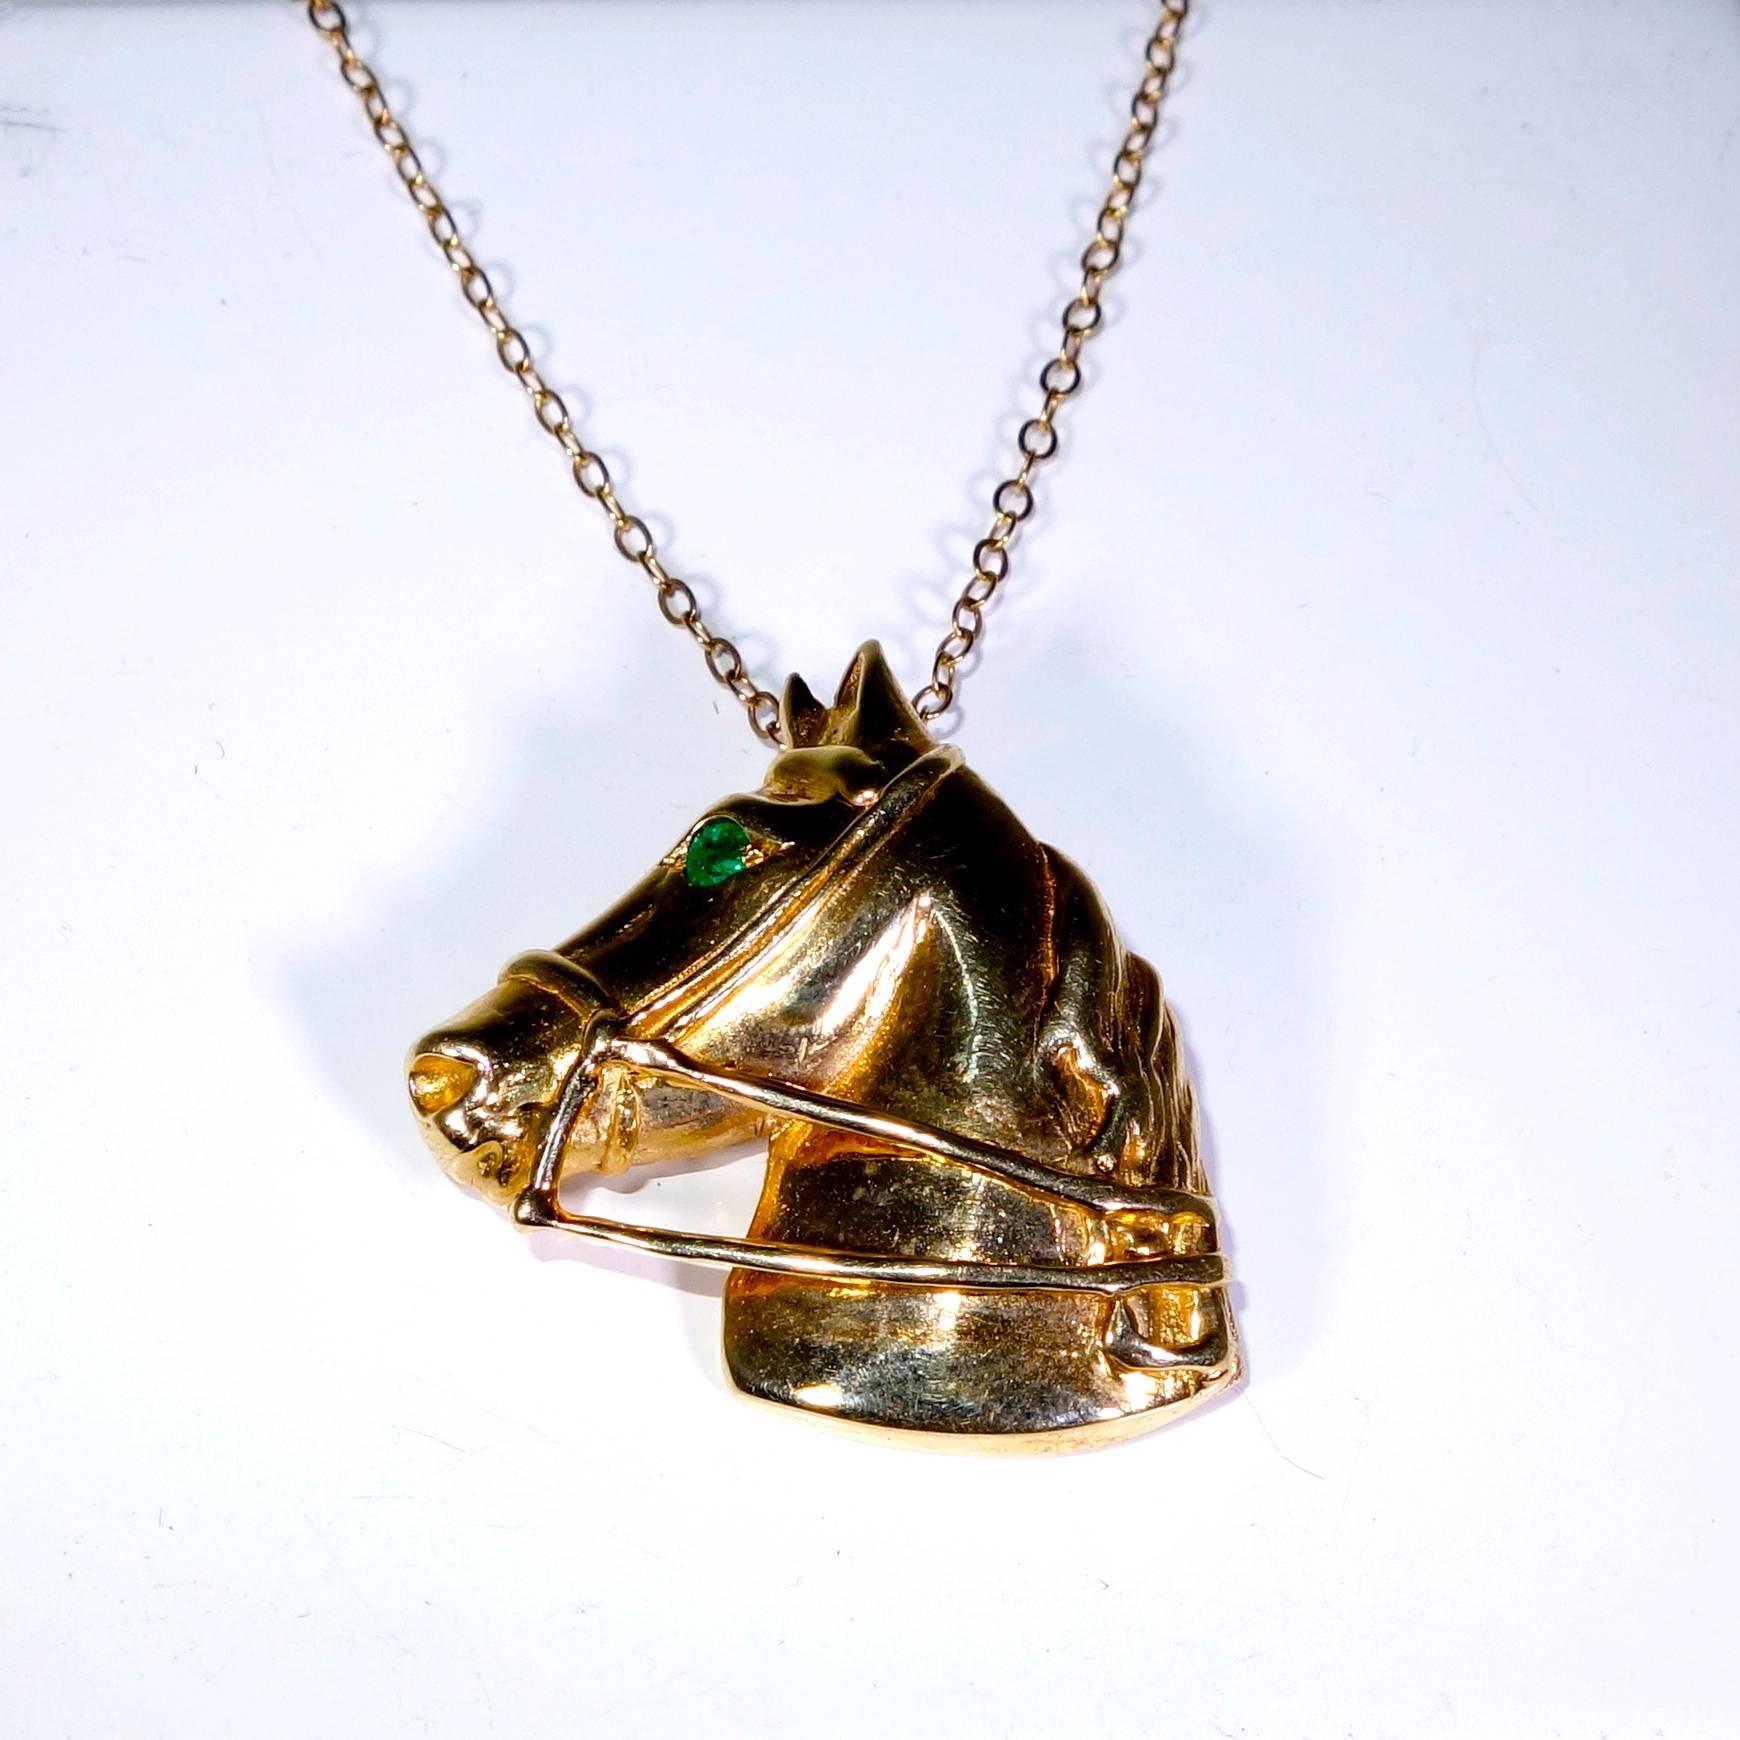 14K yellow gold with bright green emerald eyes, which weigh approximately .20 cts. this horse is 1 inch in diameter and suspends from a gold chain.